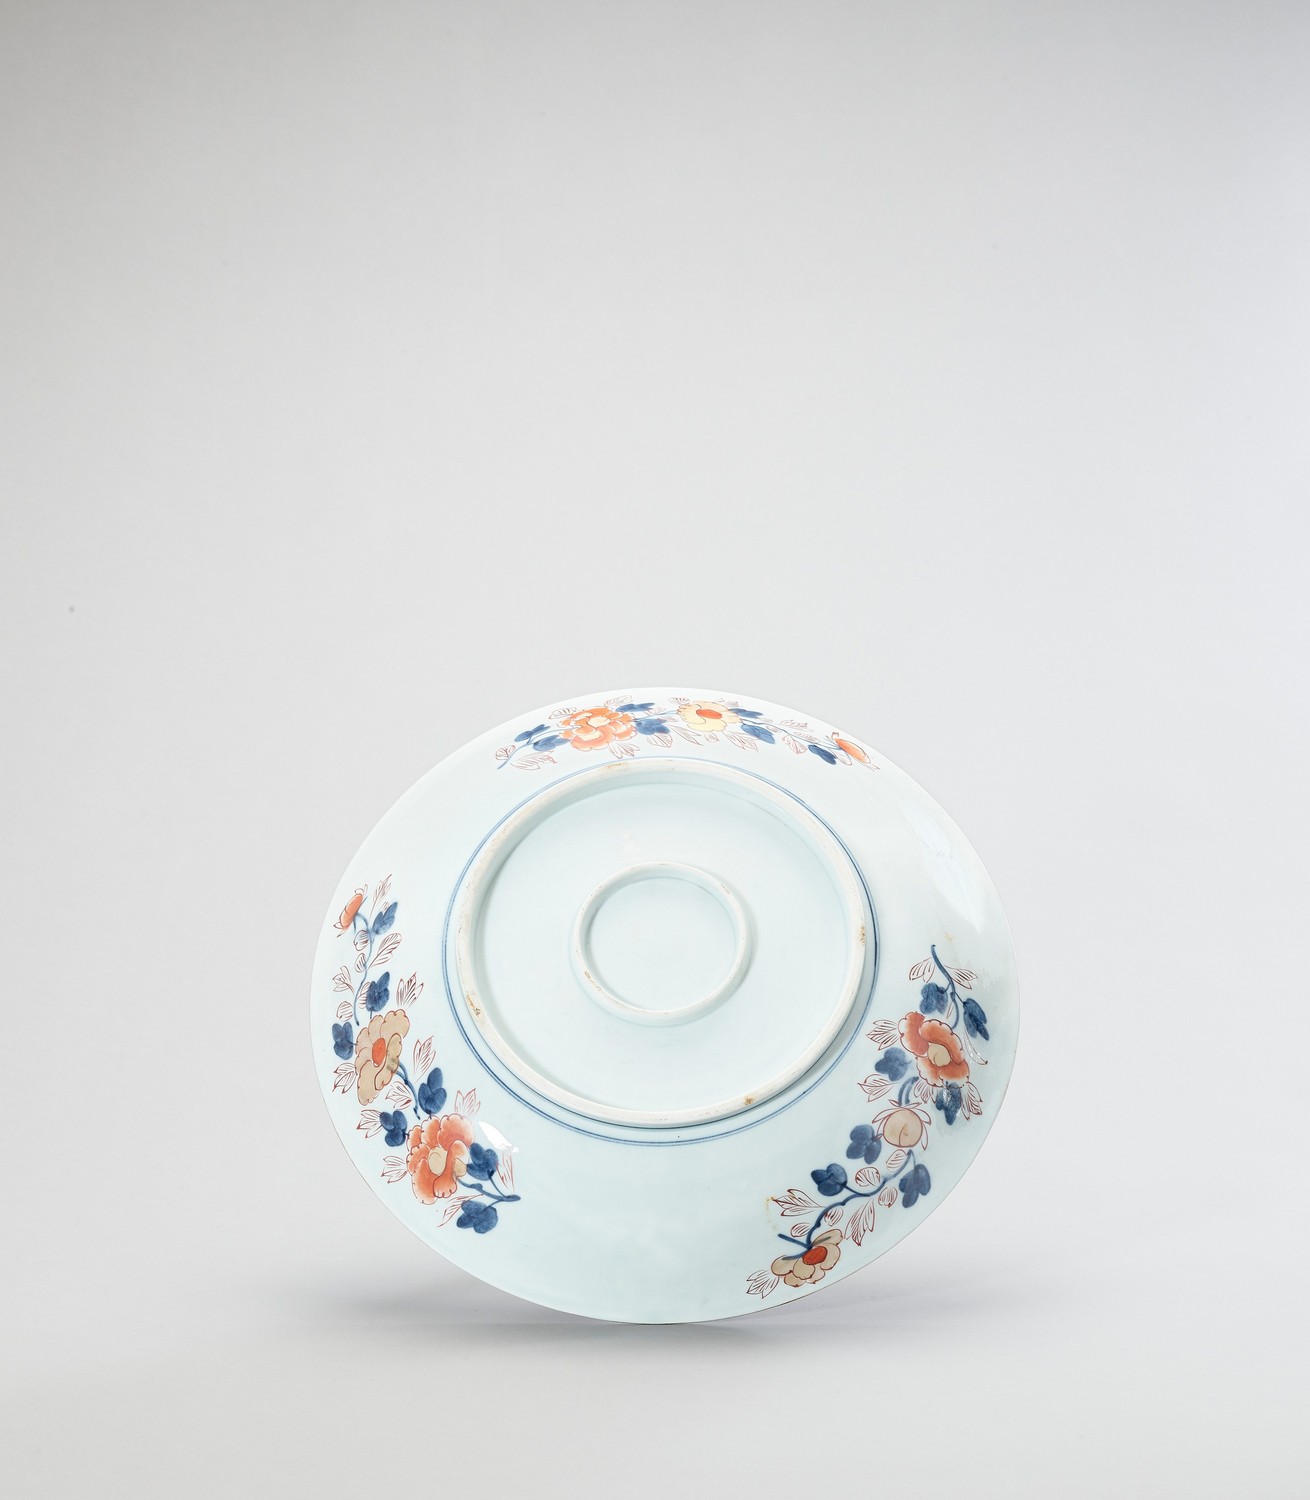 A LARGE IMARI PORCELAIN CHARGER - Image 3 of 4